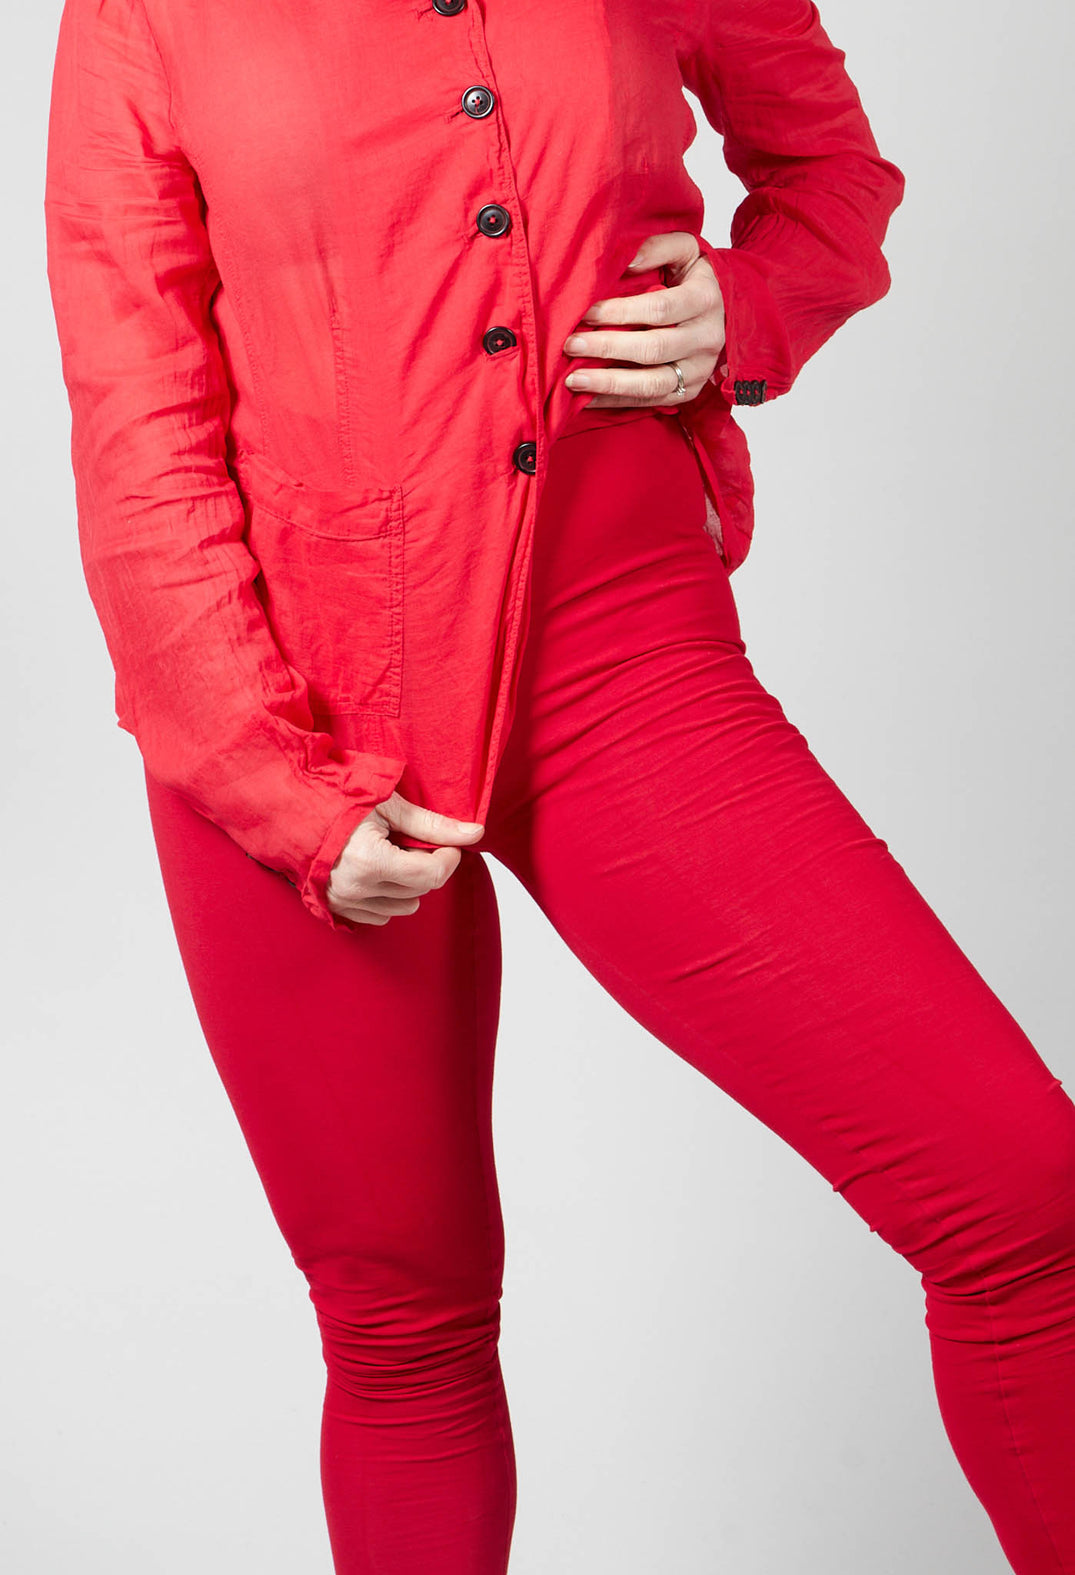 Leggings with Elasticated Waist in Red